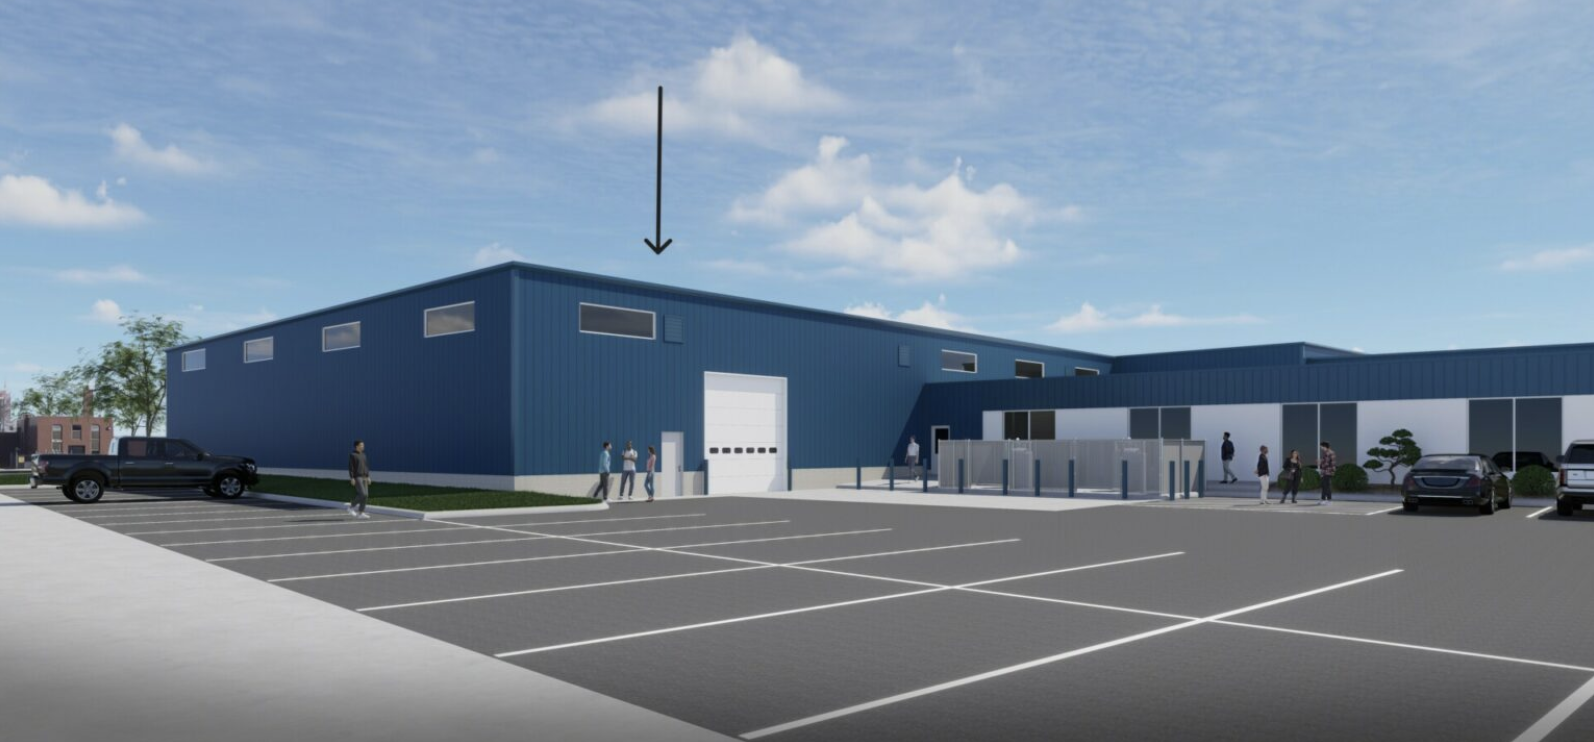 American Baler To Add New Wing At Bellevue, OH Facility